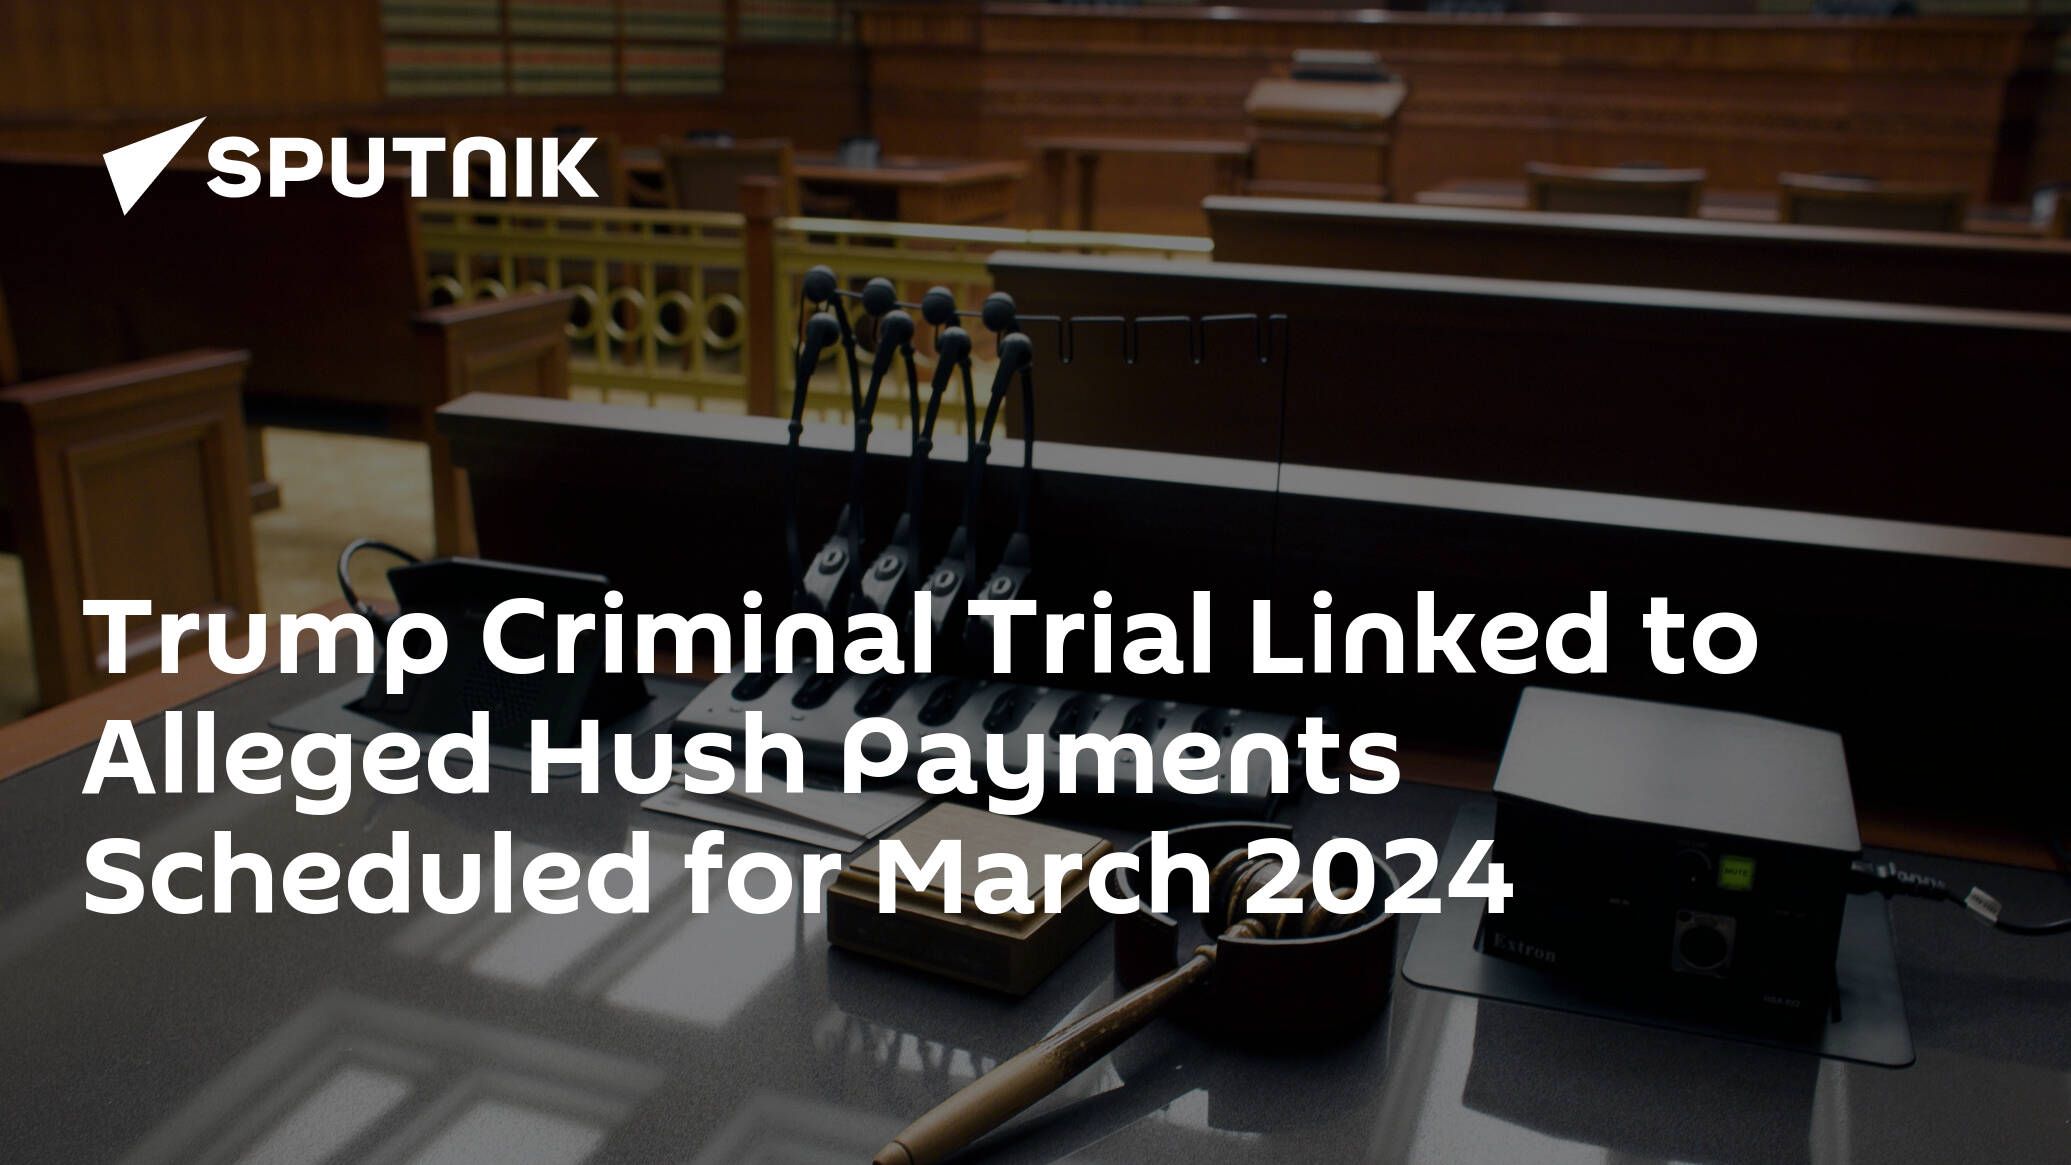 Trump Criminal Trial Linked to Alleged Hush Payments Scheduled for March 2024